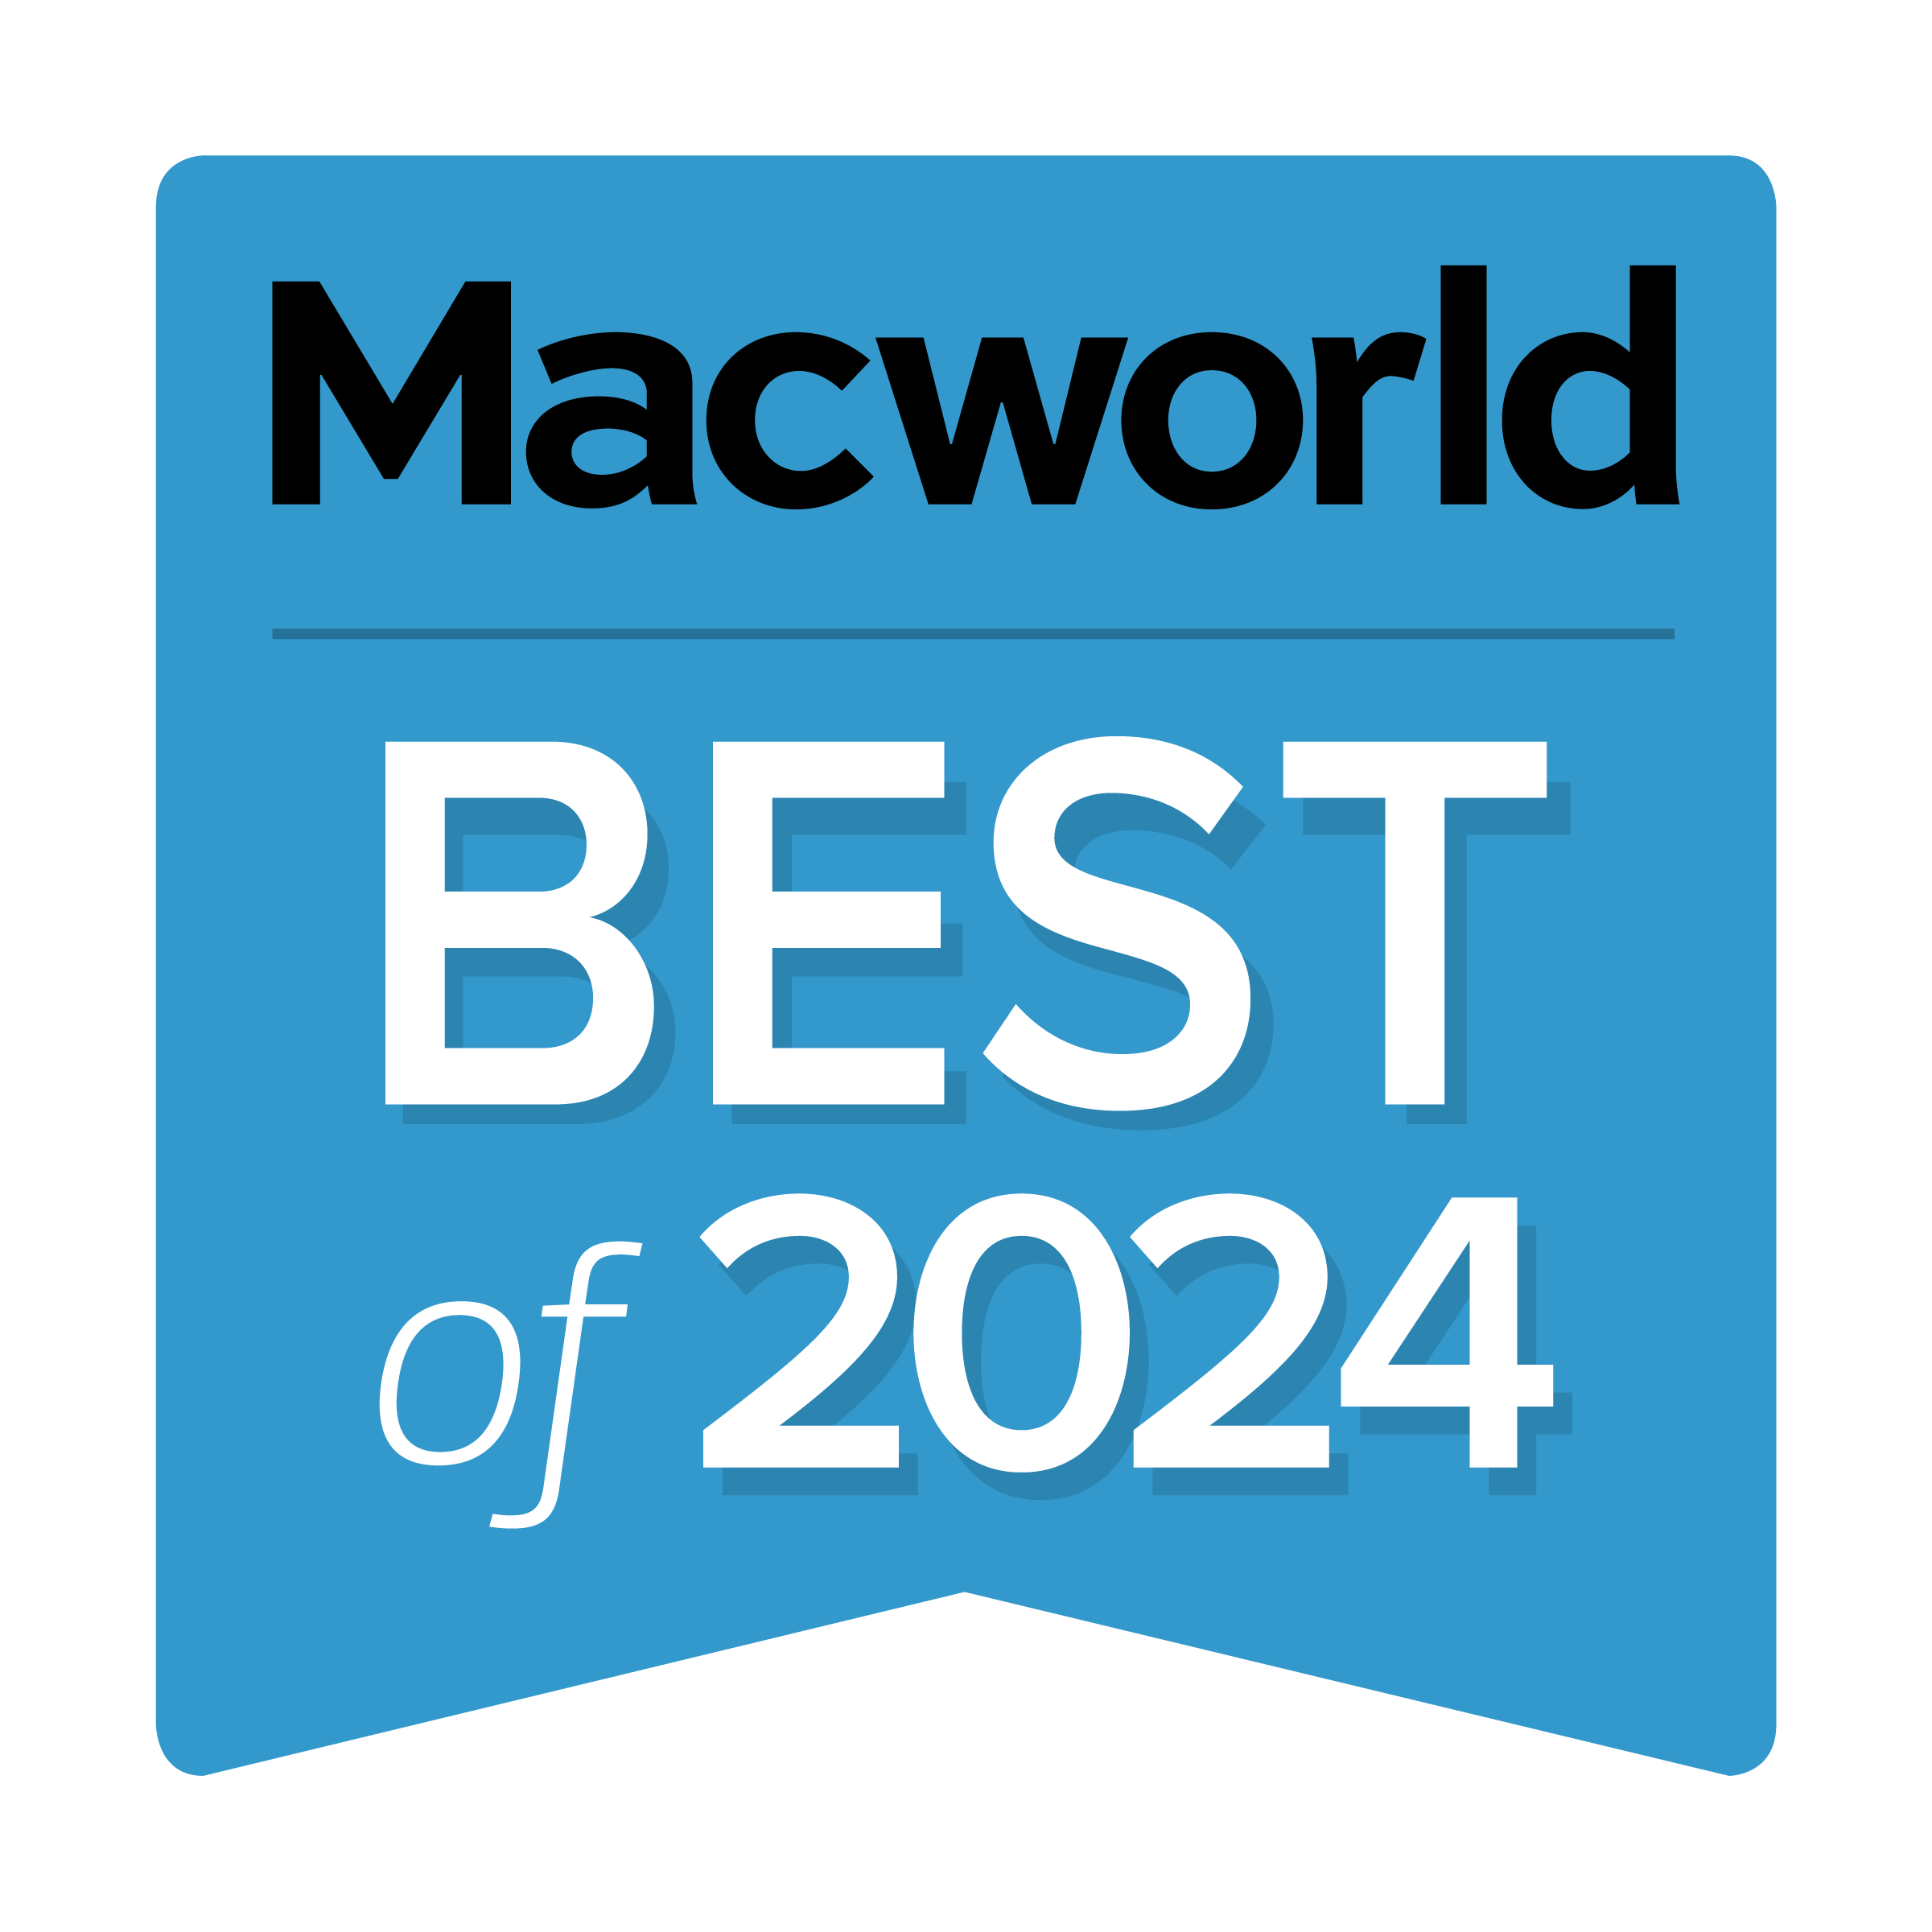 PD2725U is awarded the best of 2024 monitor for Mac-friendly features from MacWorld.